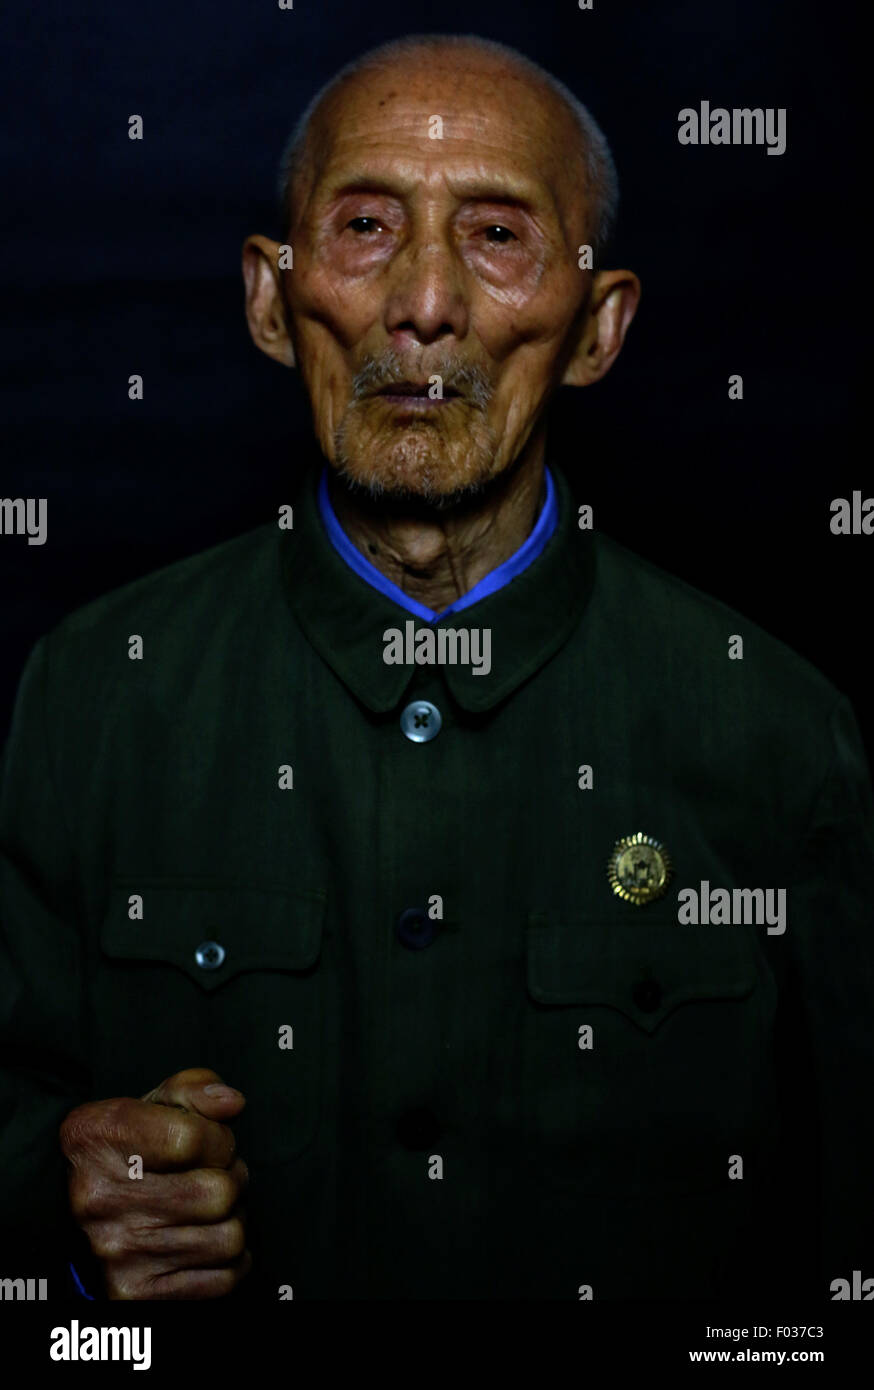 May 1, 2013 - CHN - CHINA - May 1 2013: (EDITORIAL USE ONLY. CHINA OUT)(MINIMUM PRICE: 100 USD) He Guoqing: Male, born in 1919 and now lives in Yongzhou Hunan. He joined the 4th Brigade Hunan Province government after the war occurred, and sent to Changsha School Huangpu Military Academy, then promoted as a Platoon Commander of Heavy Machine Gun Company 3rd battalion 8th Regiment 4th Brigade. He was trained in 5th term of Hongjiang training class of China -America cooperation in 1943, after 4 months he was Major leader of 7th Commando. It was directed by Dai Li later by Tao Yishan. They went d Stock Photo